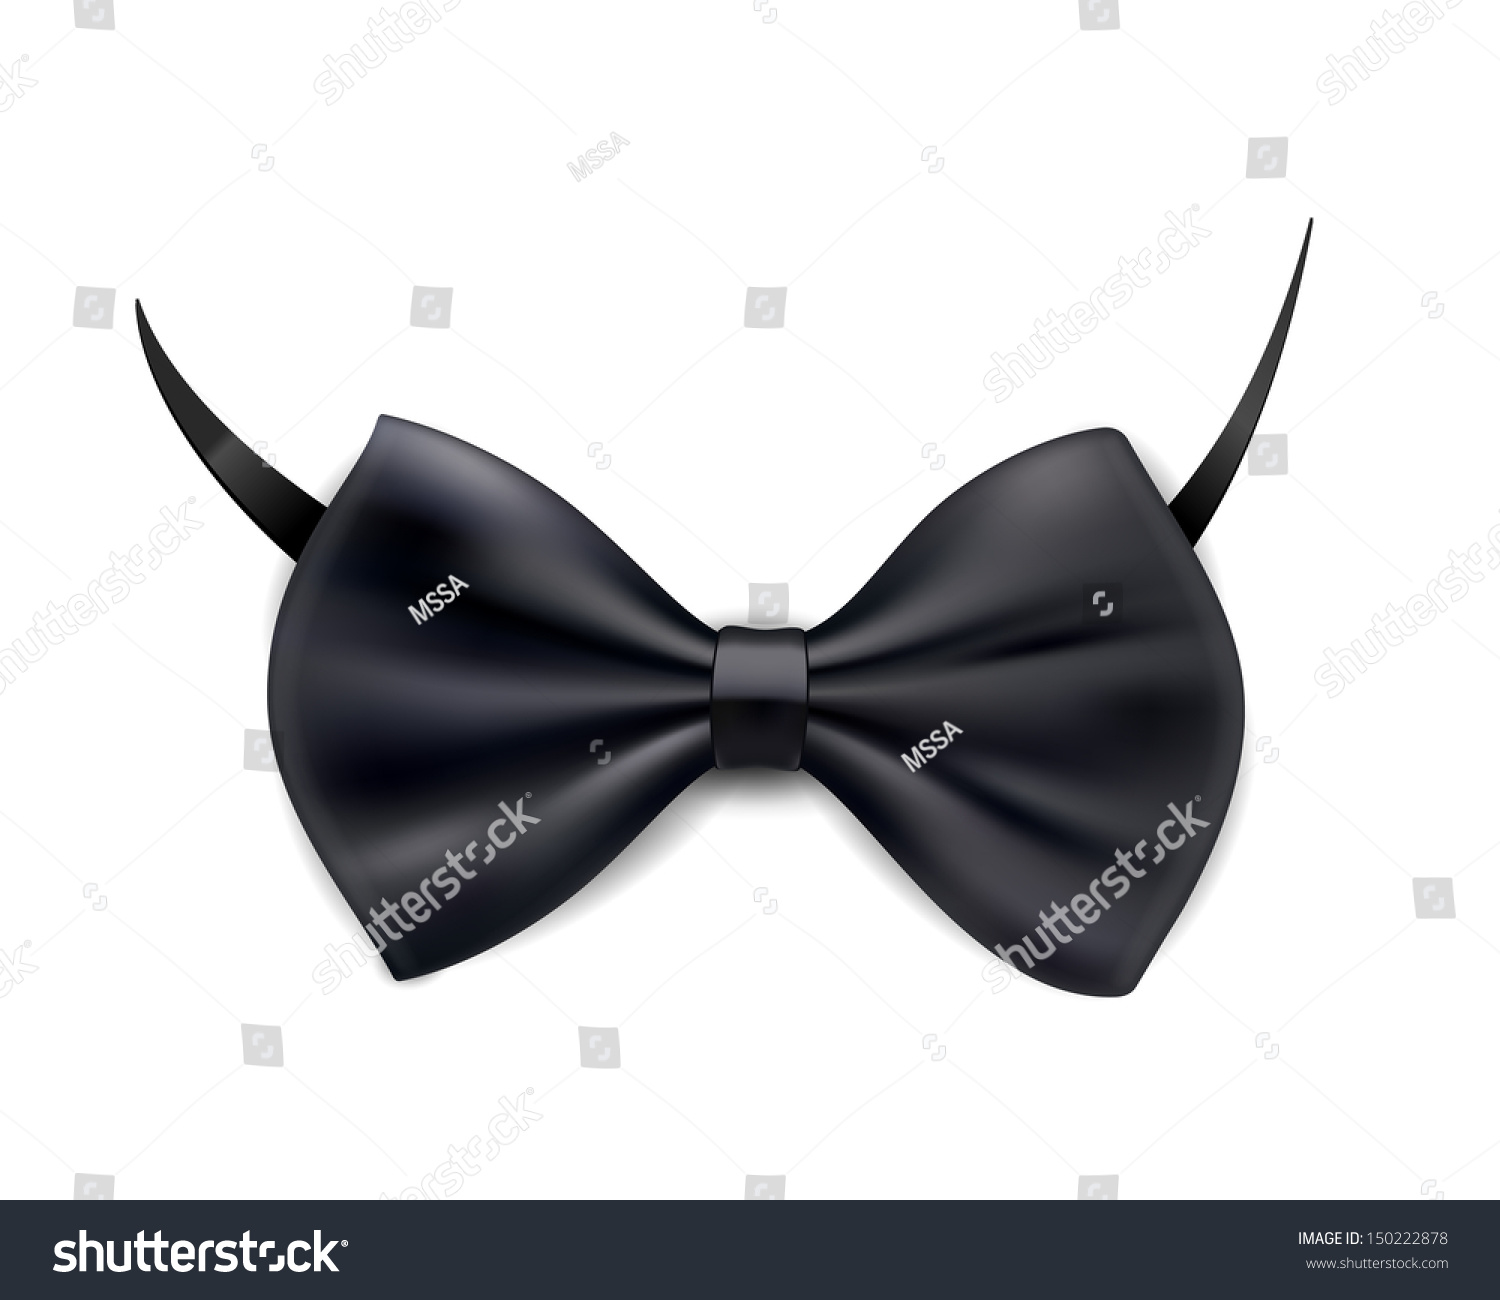 Vector Black Bow Tie Isolated On White - 150222878 : Shutterstock